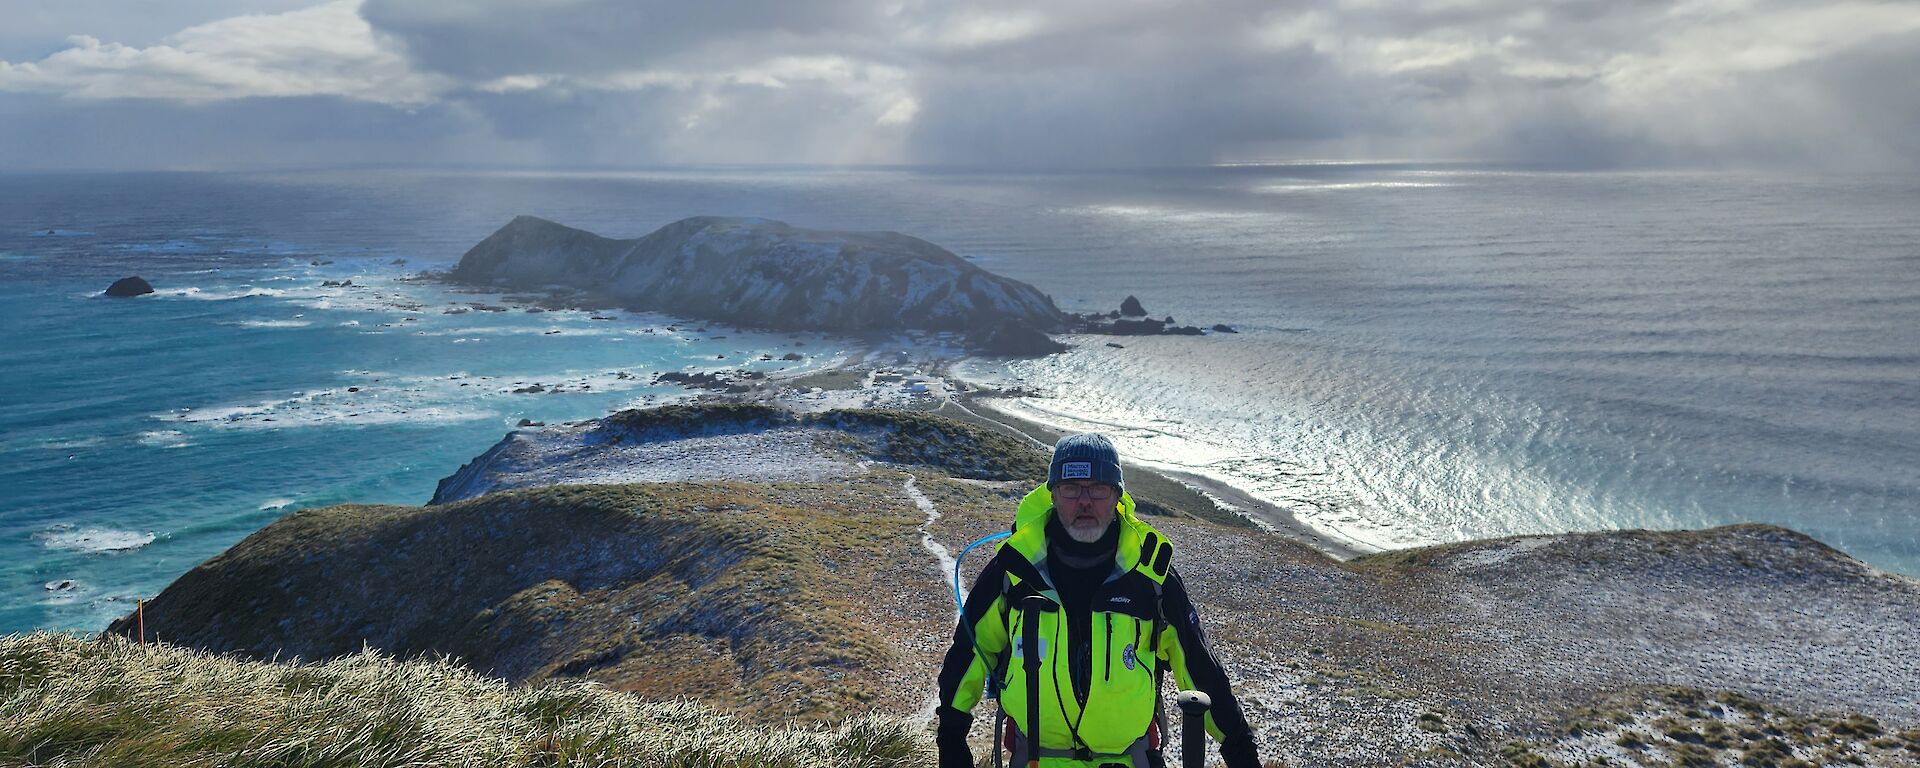 Dieso Mike departing station atop the Doctor's Track - Macquarie Island 2023.